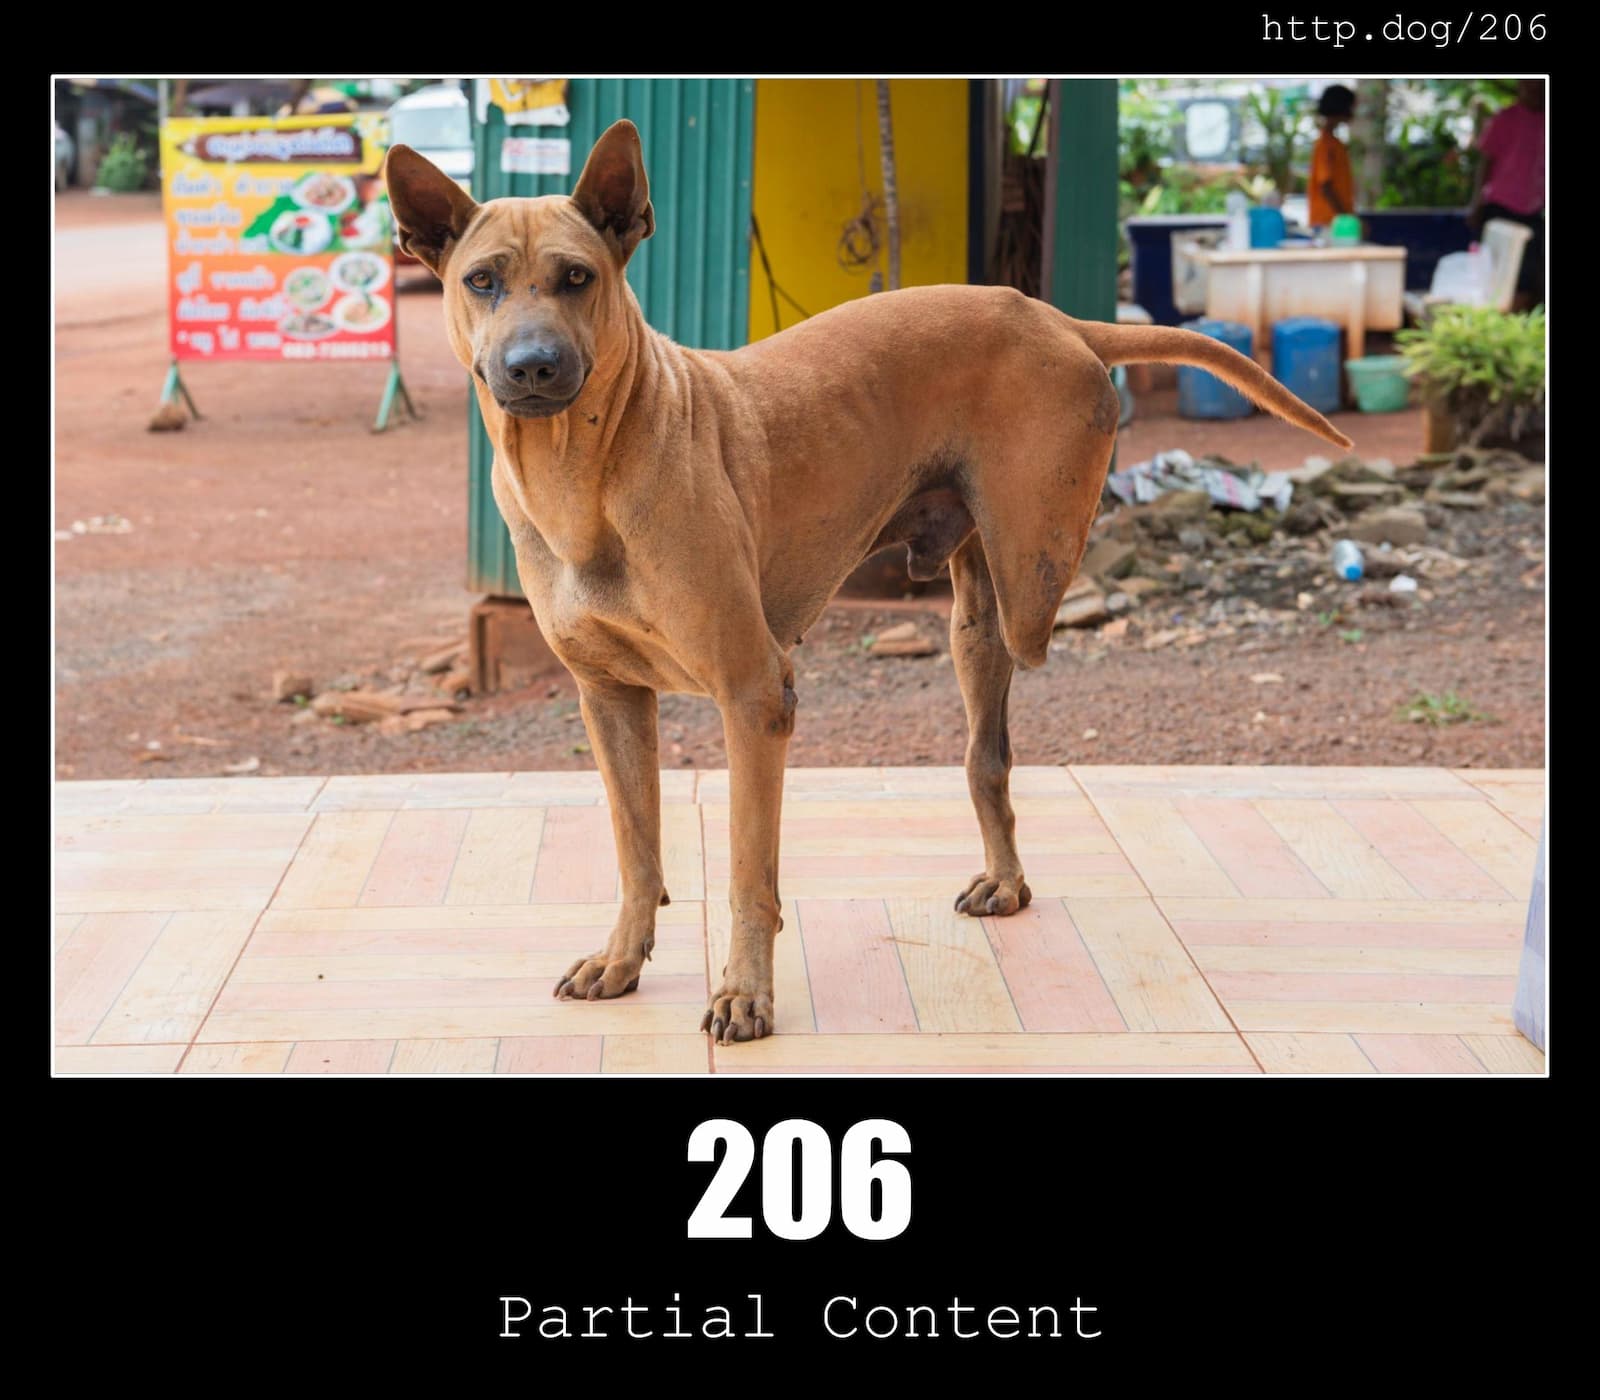 HTTP Status Code 206 Partial Content  & Dogs